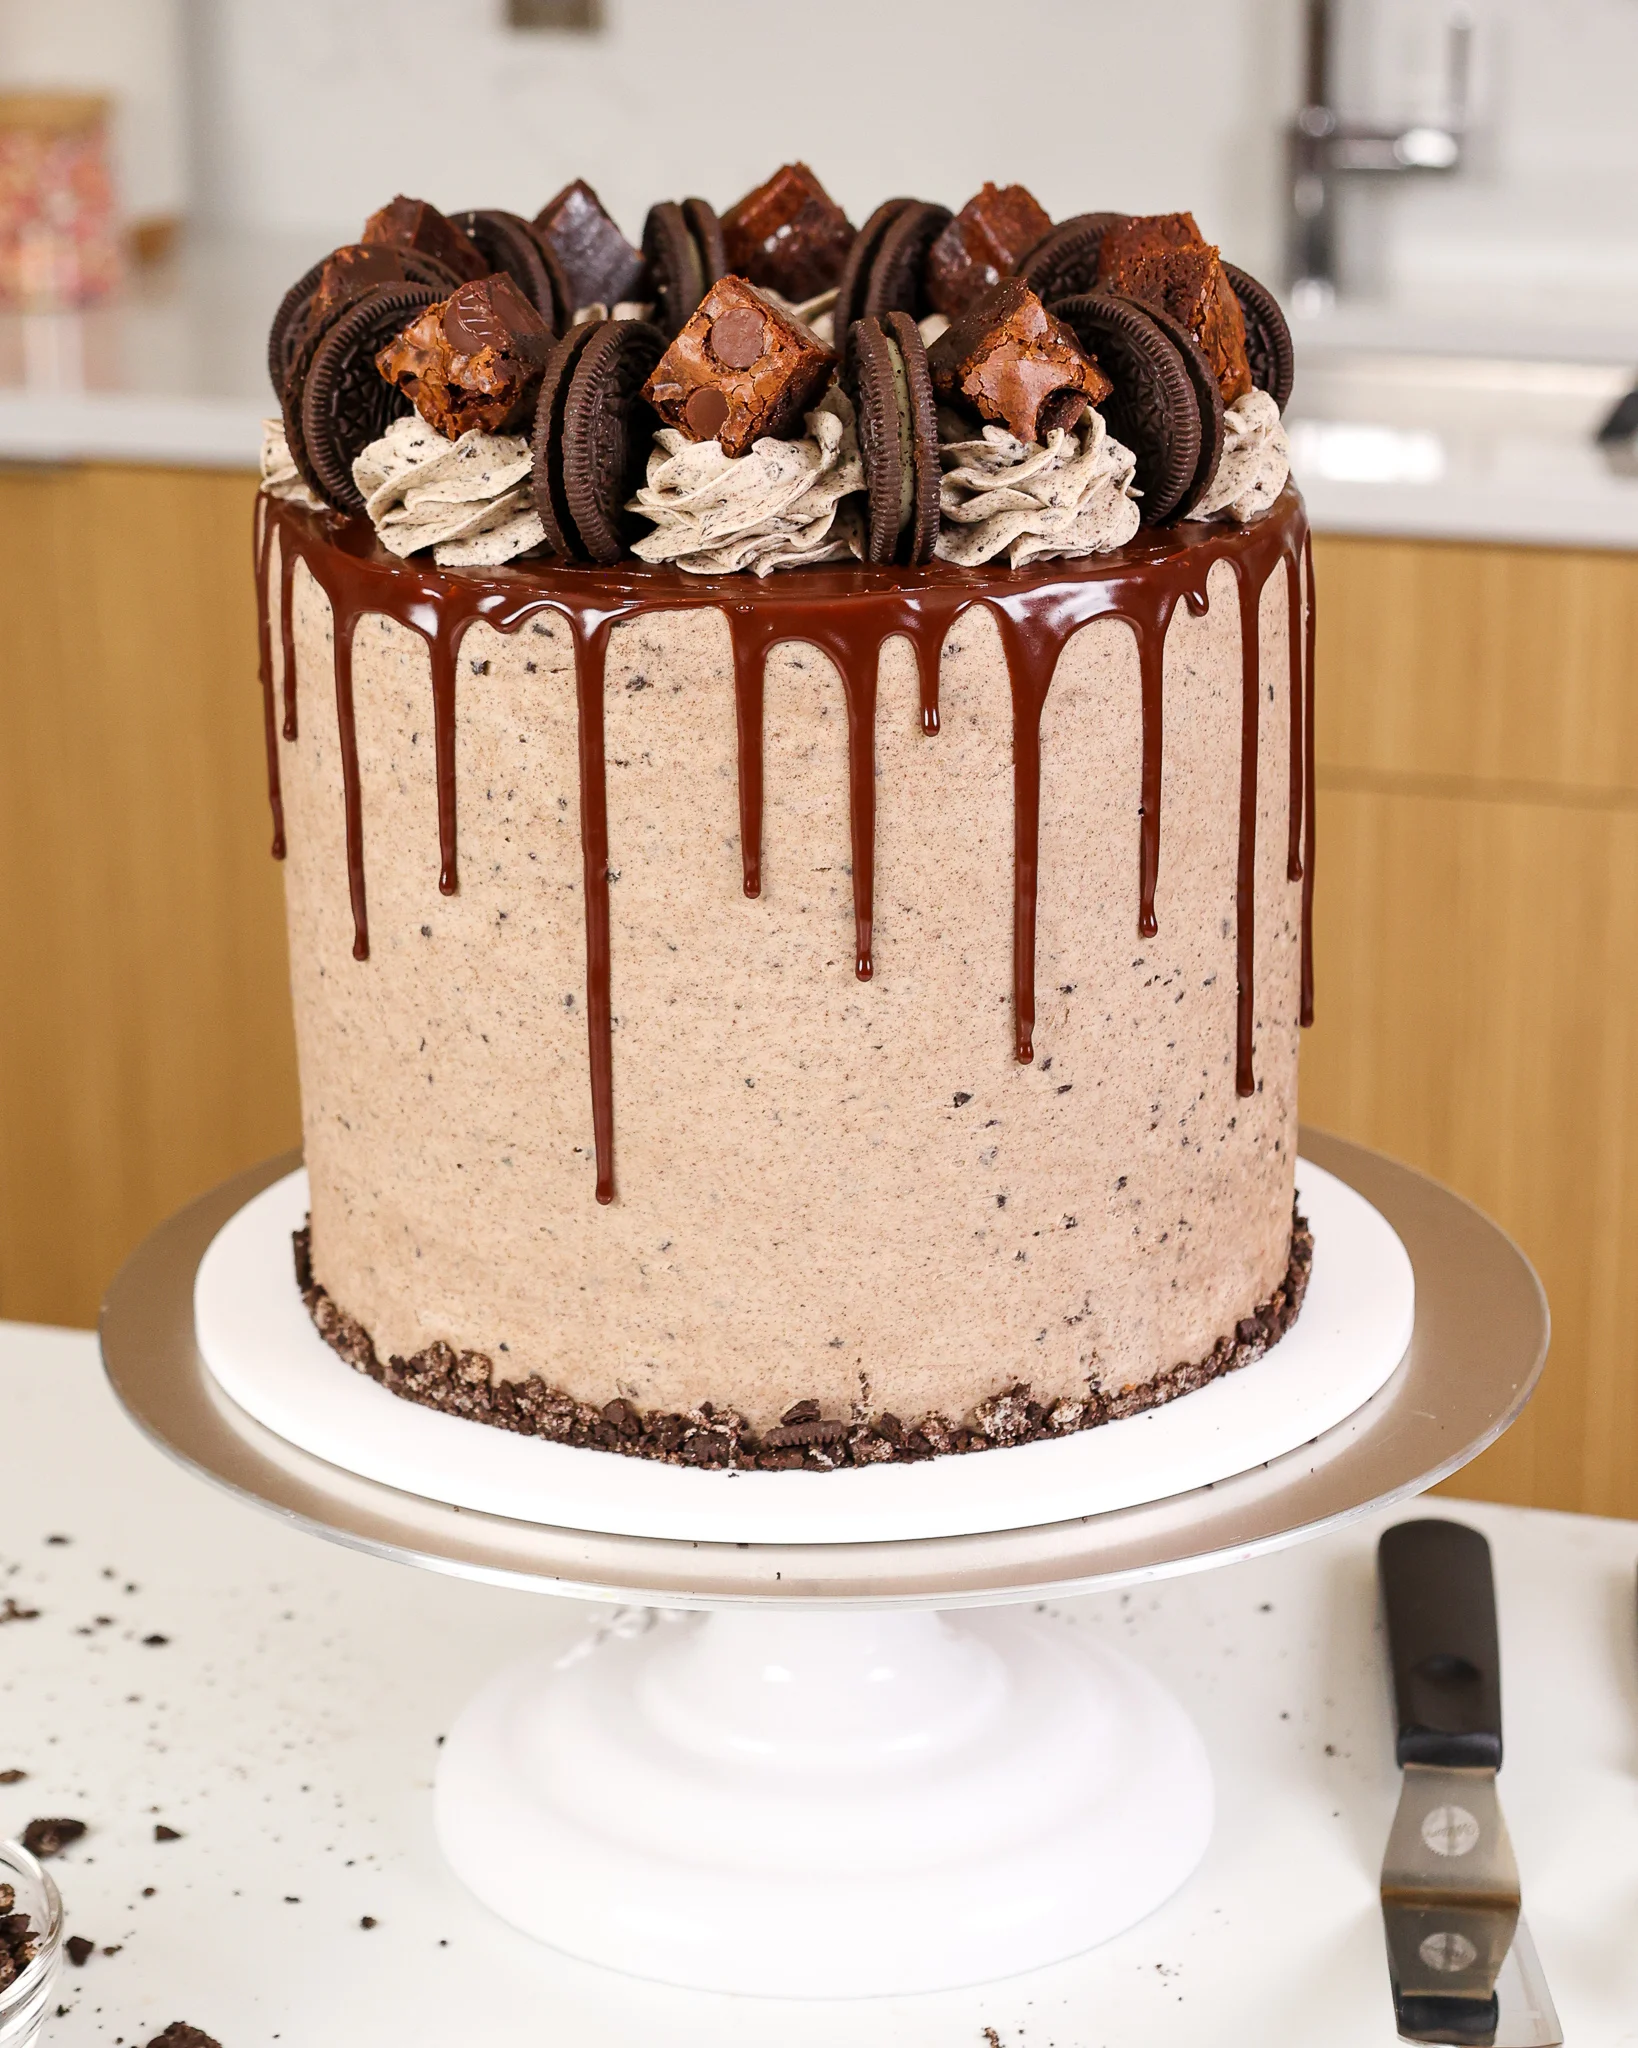 image of an oreo brownie cake that's been decorated with a chocolate drip and brownie bites